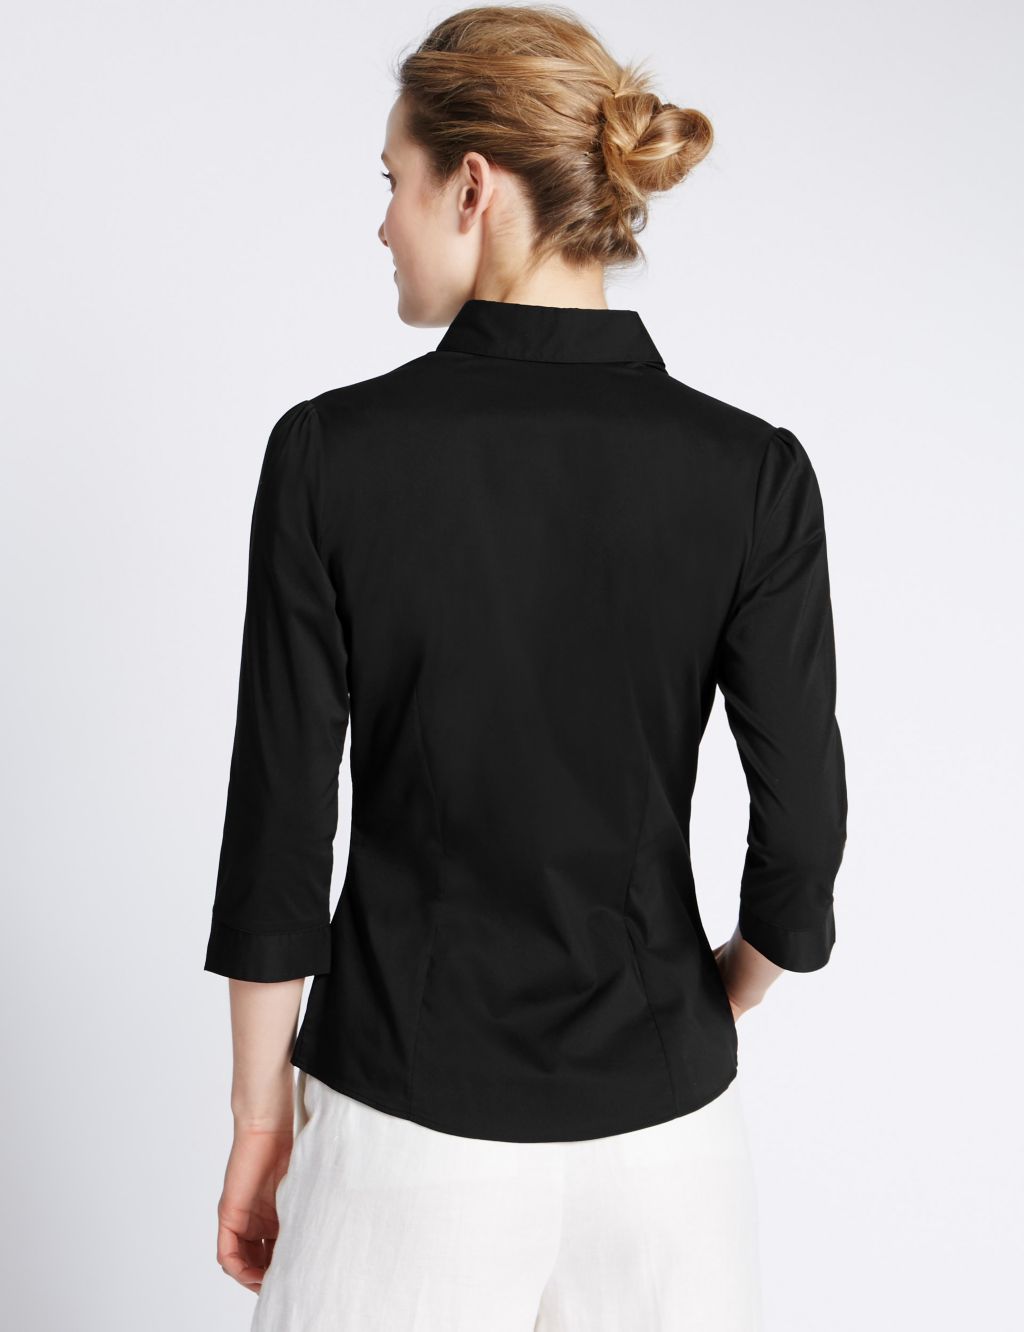 Curved Hem 3/4 Sleeve Shirt | M&S Collection | M&S